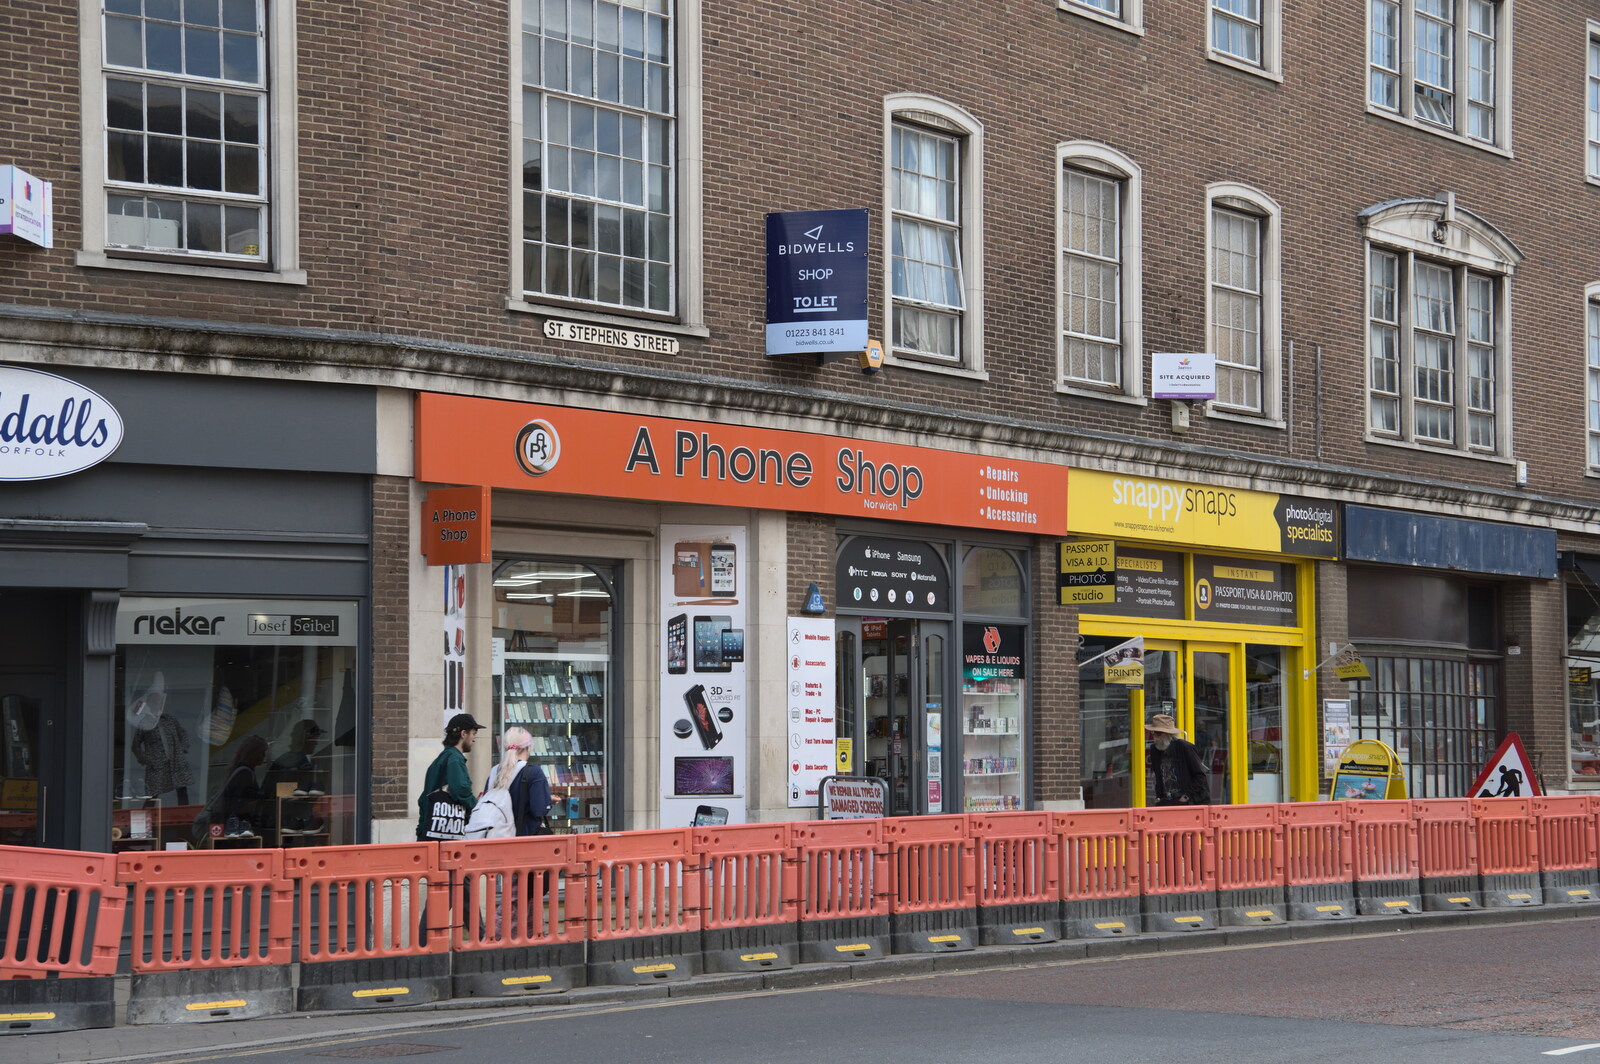 Lunch at Yo! Sushi, Norwich, Norfolk - 19th June 2022: A phone shop with a stunning lack of imagination